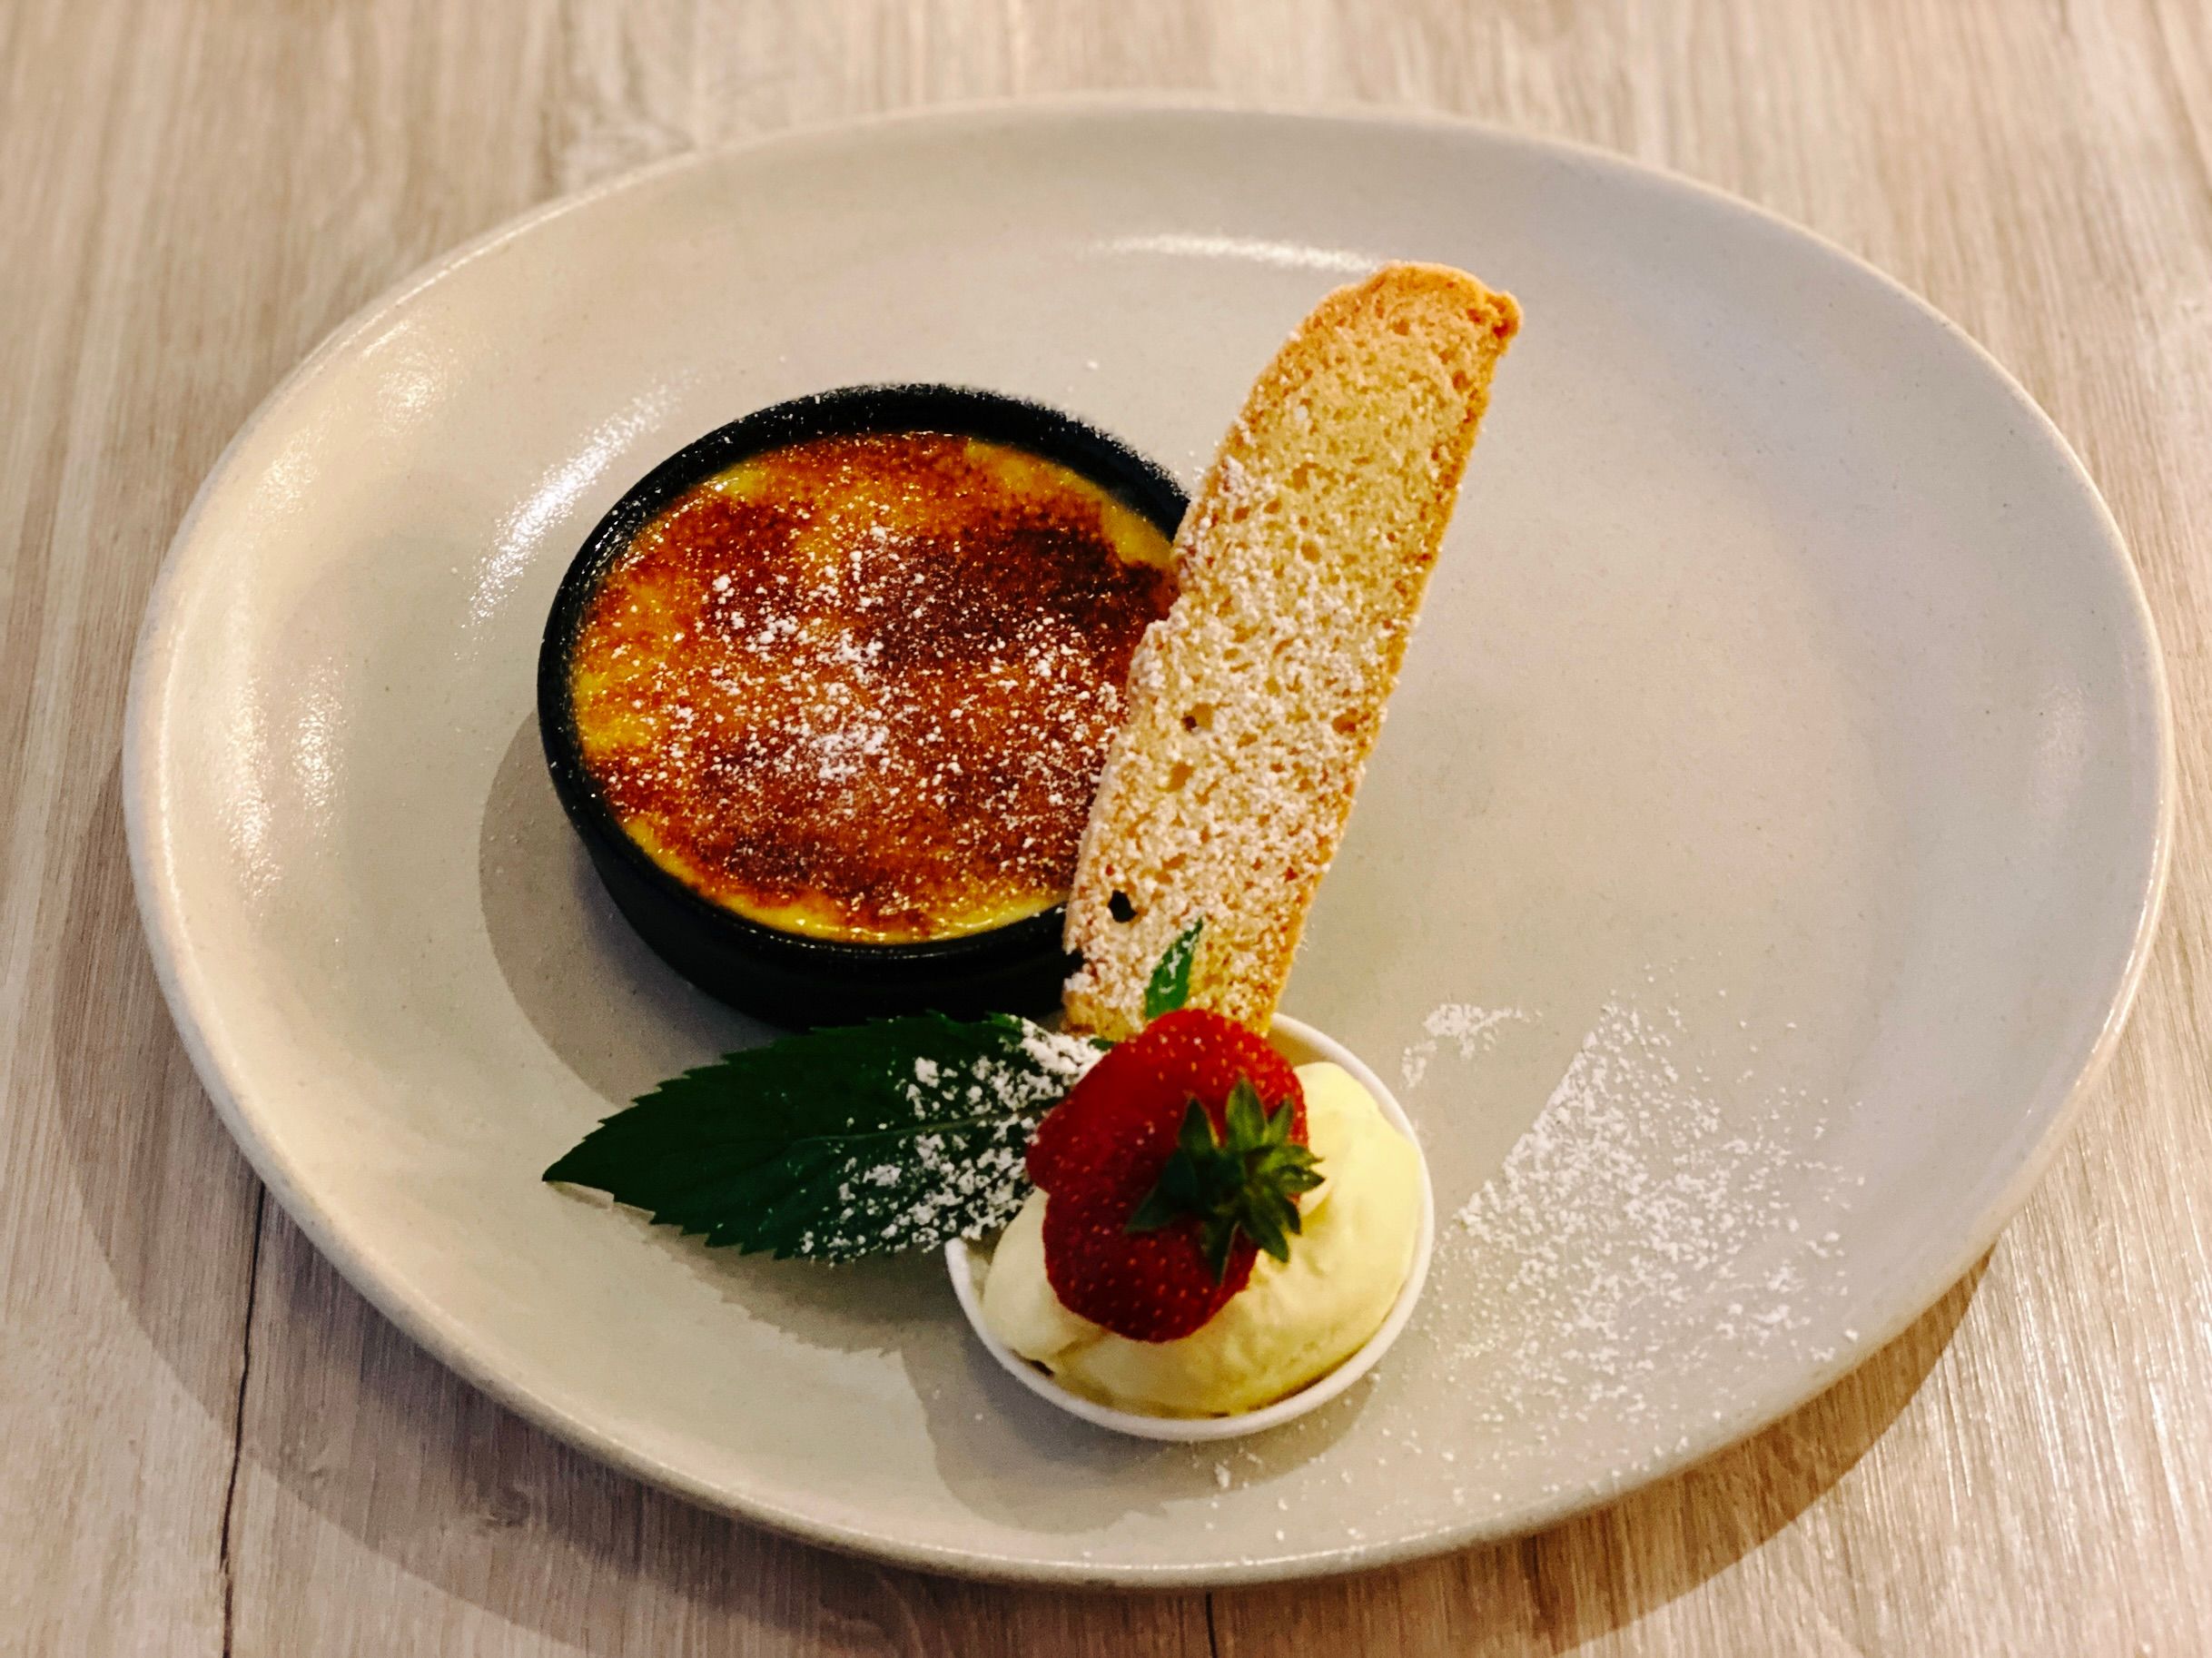 A photo of a crème brûlée alongside a scoop of vanilla bean gelato with a strawberry on top and a piece of biscotti.